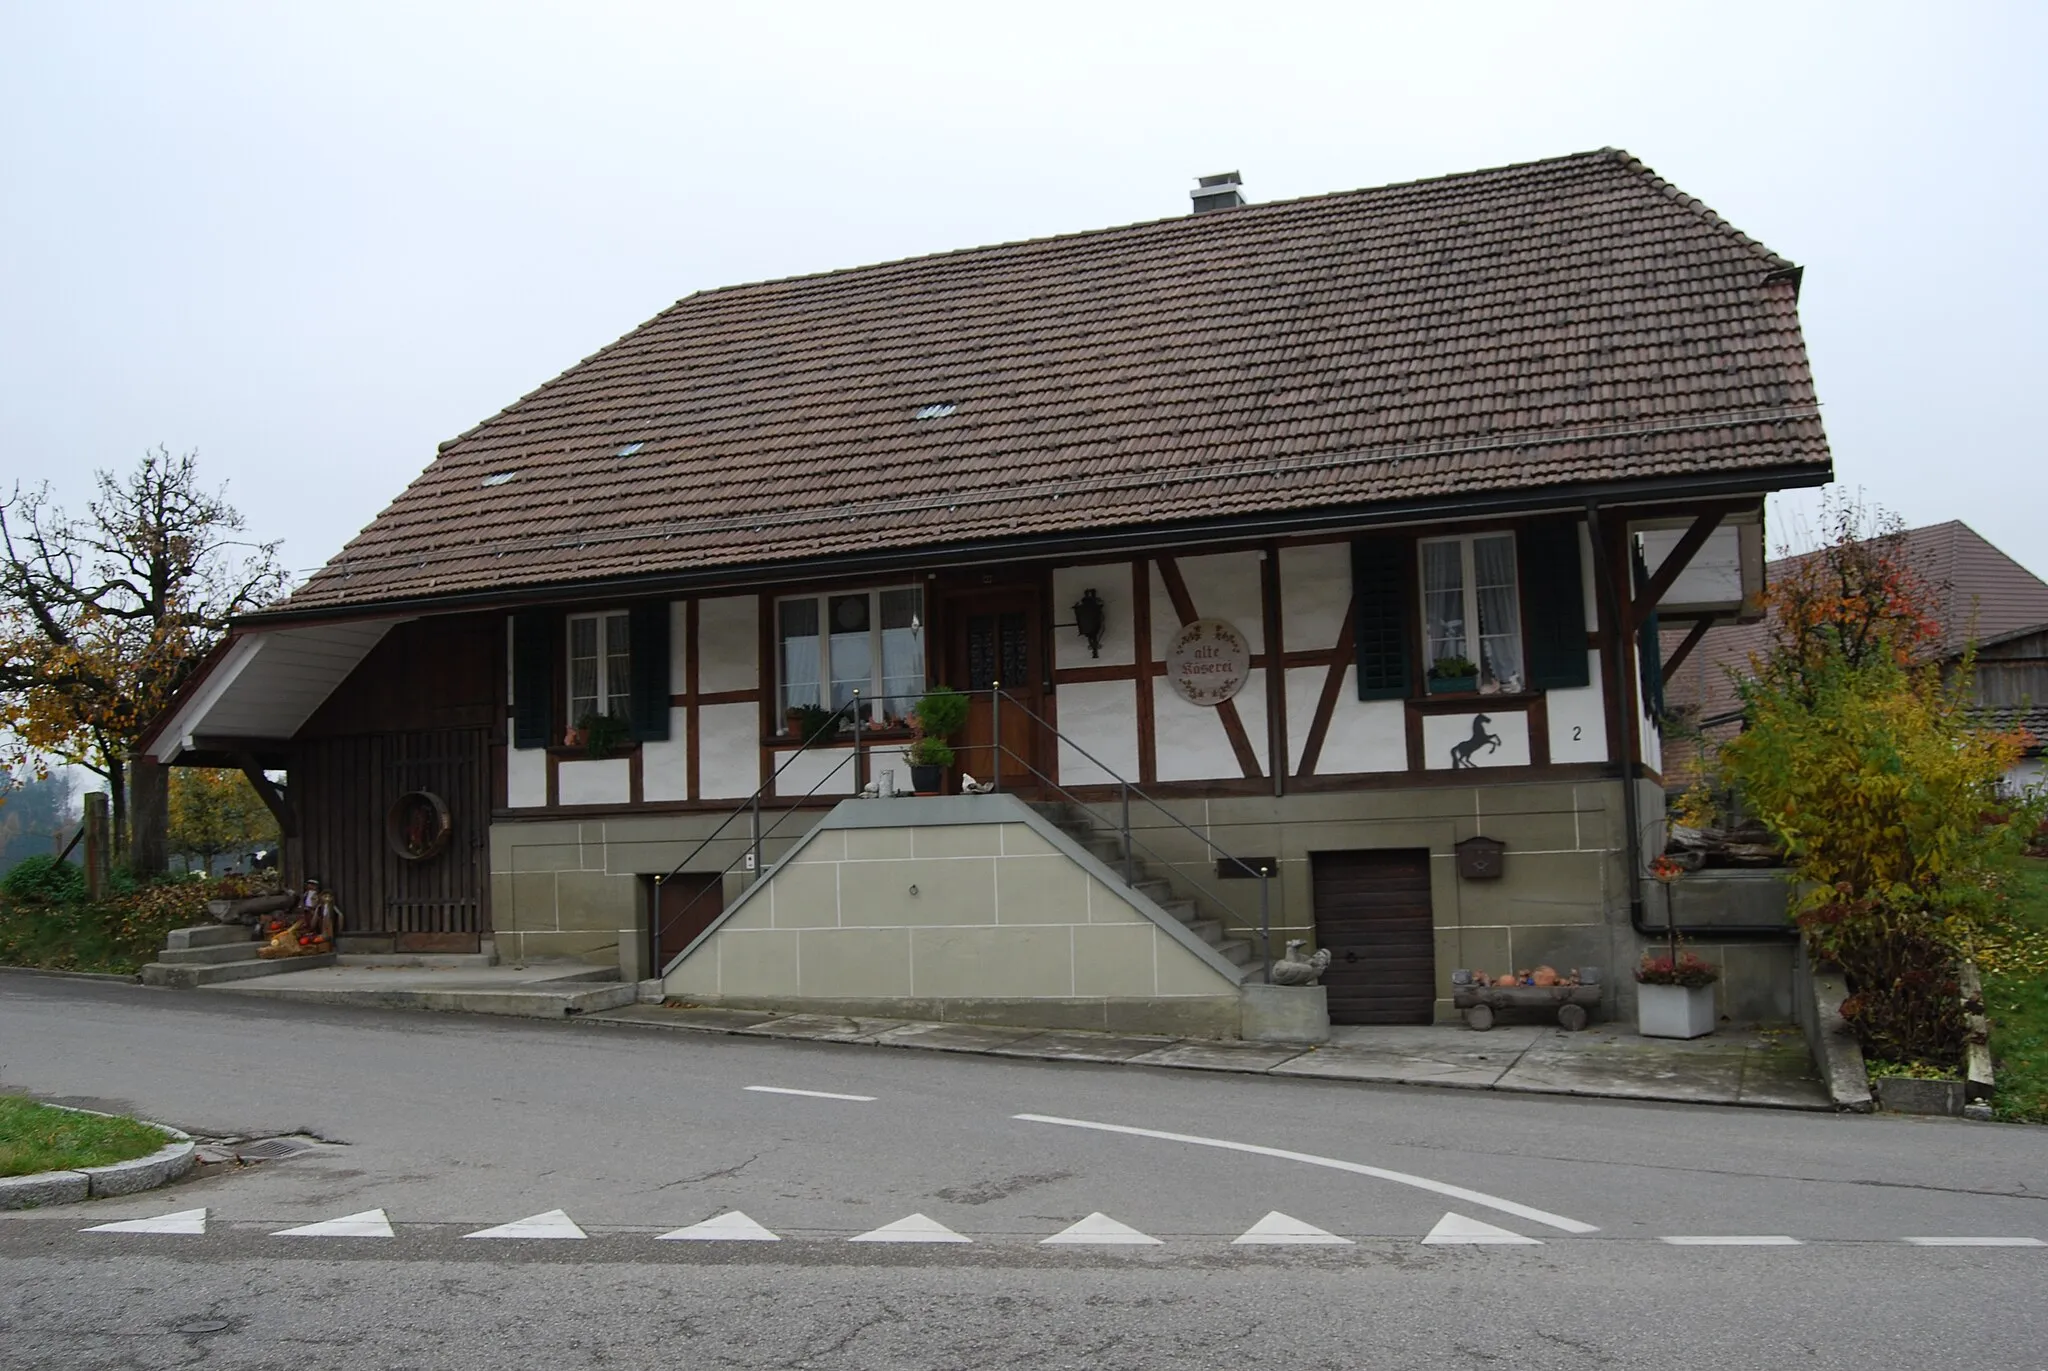 Photo showing: Timber framing house at Zuzwil, canton of Bern, Switzerland